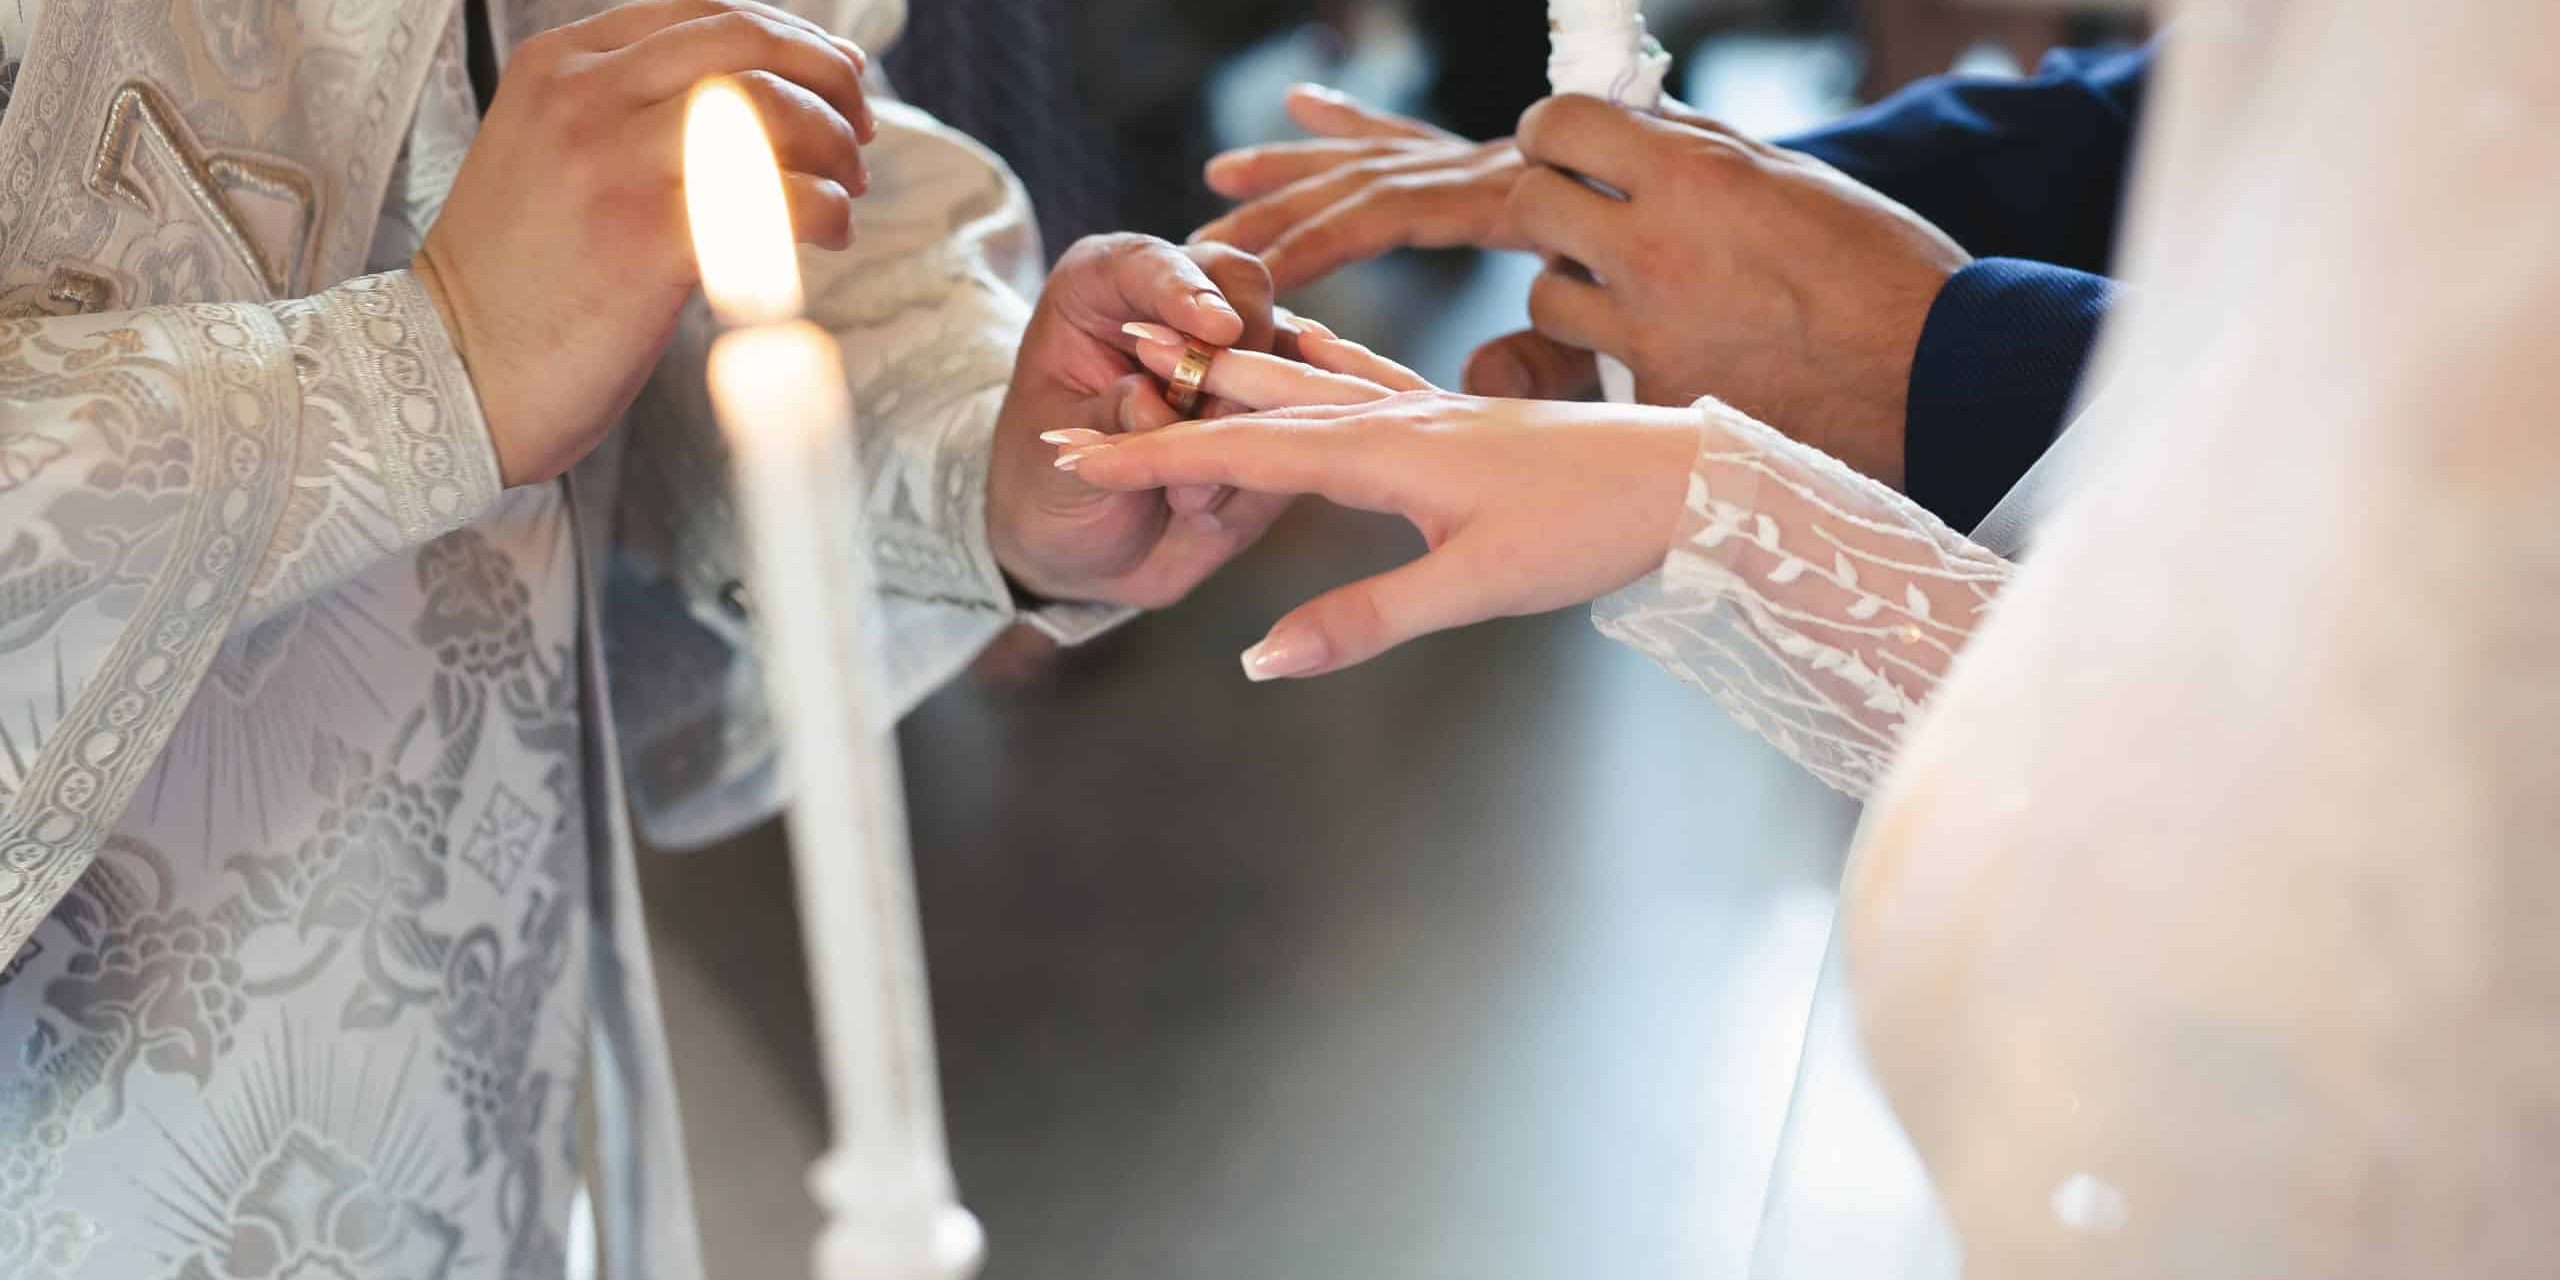 The priest consecrates the wedding rings on the fingers of the bride and groom. Wedding tradition and ritual. hands of a young couple in the church.